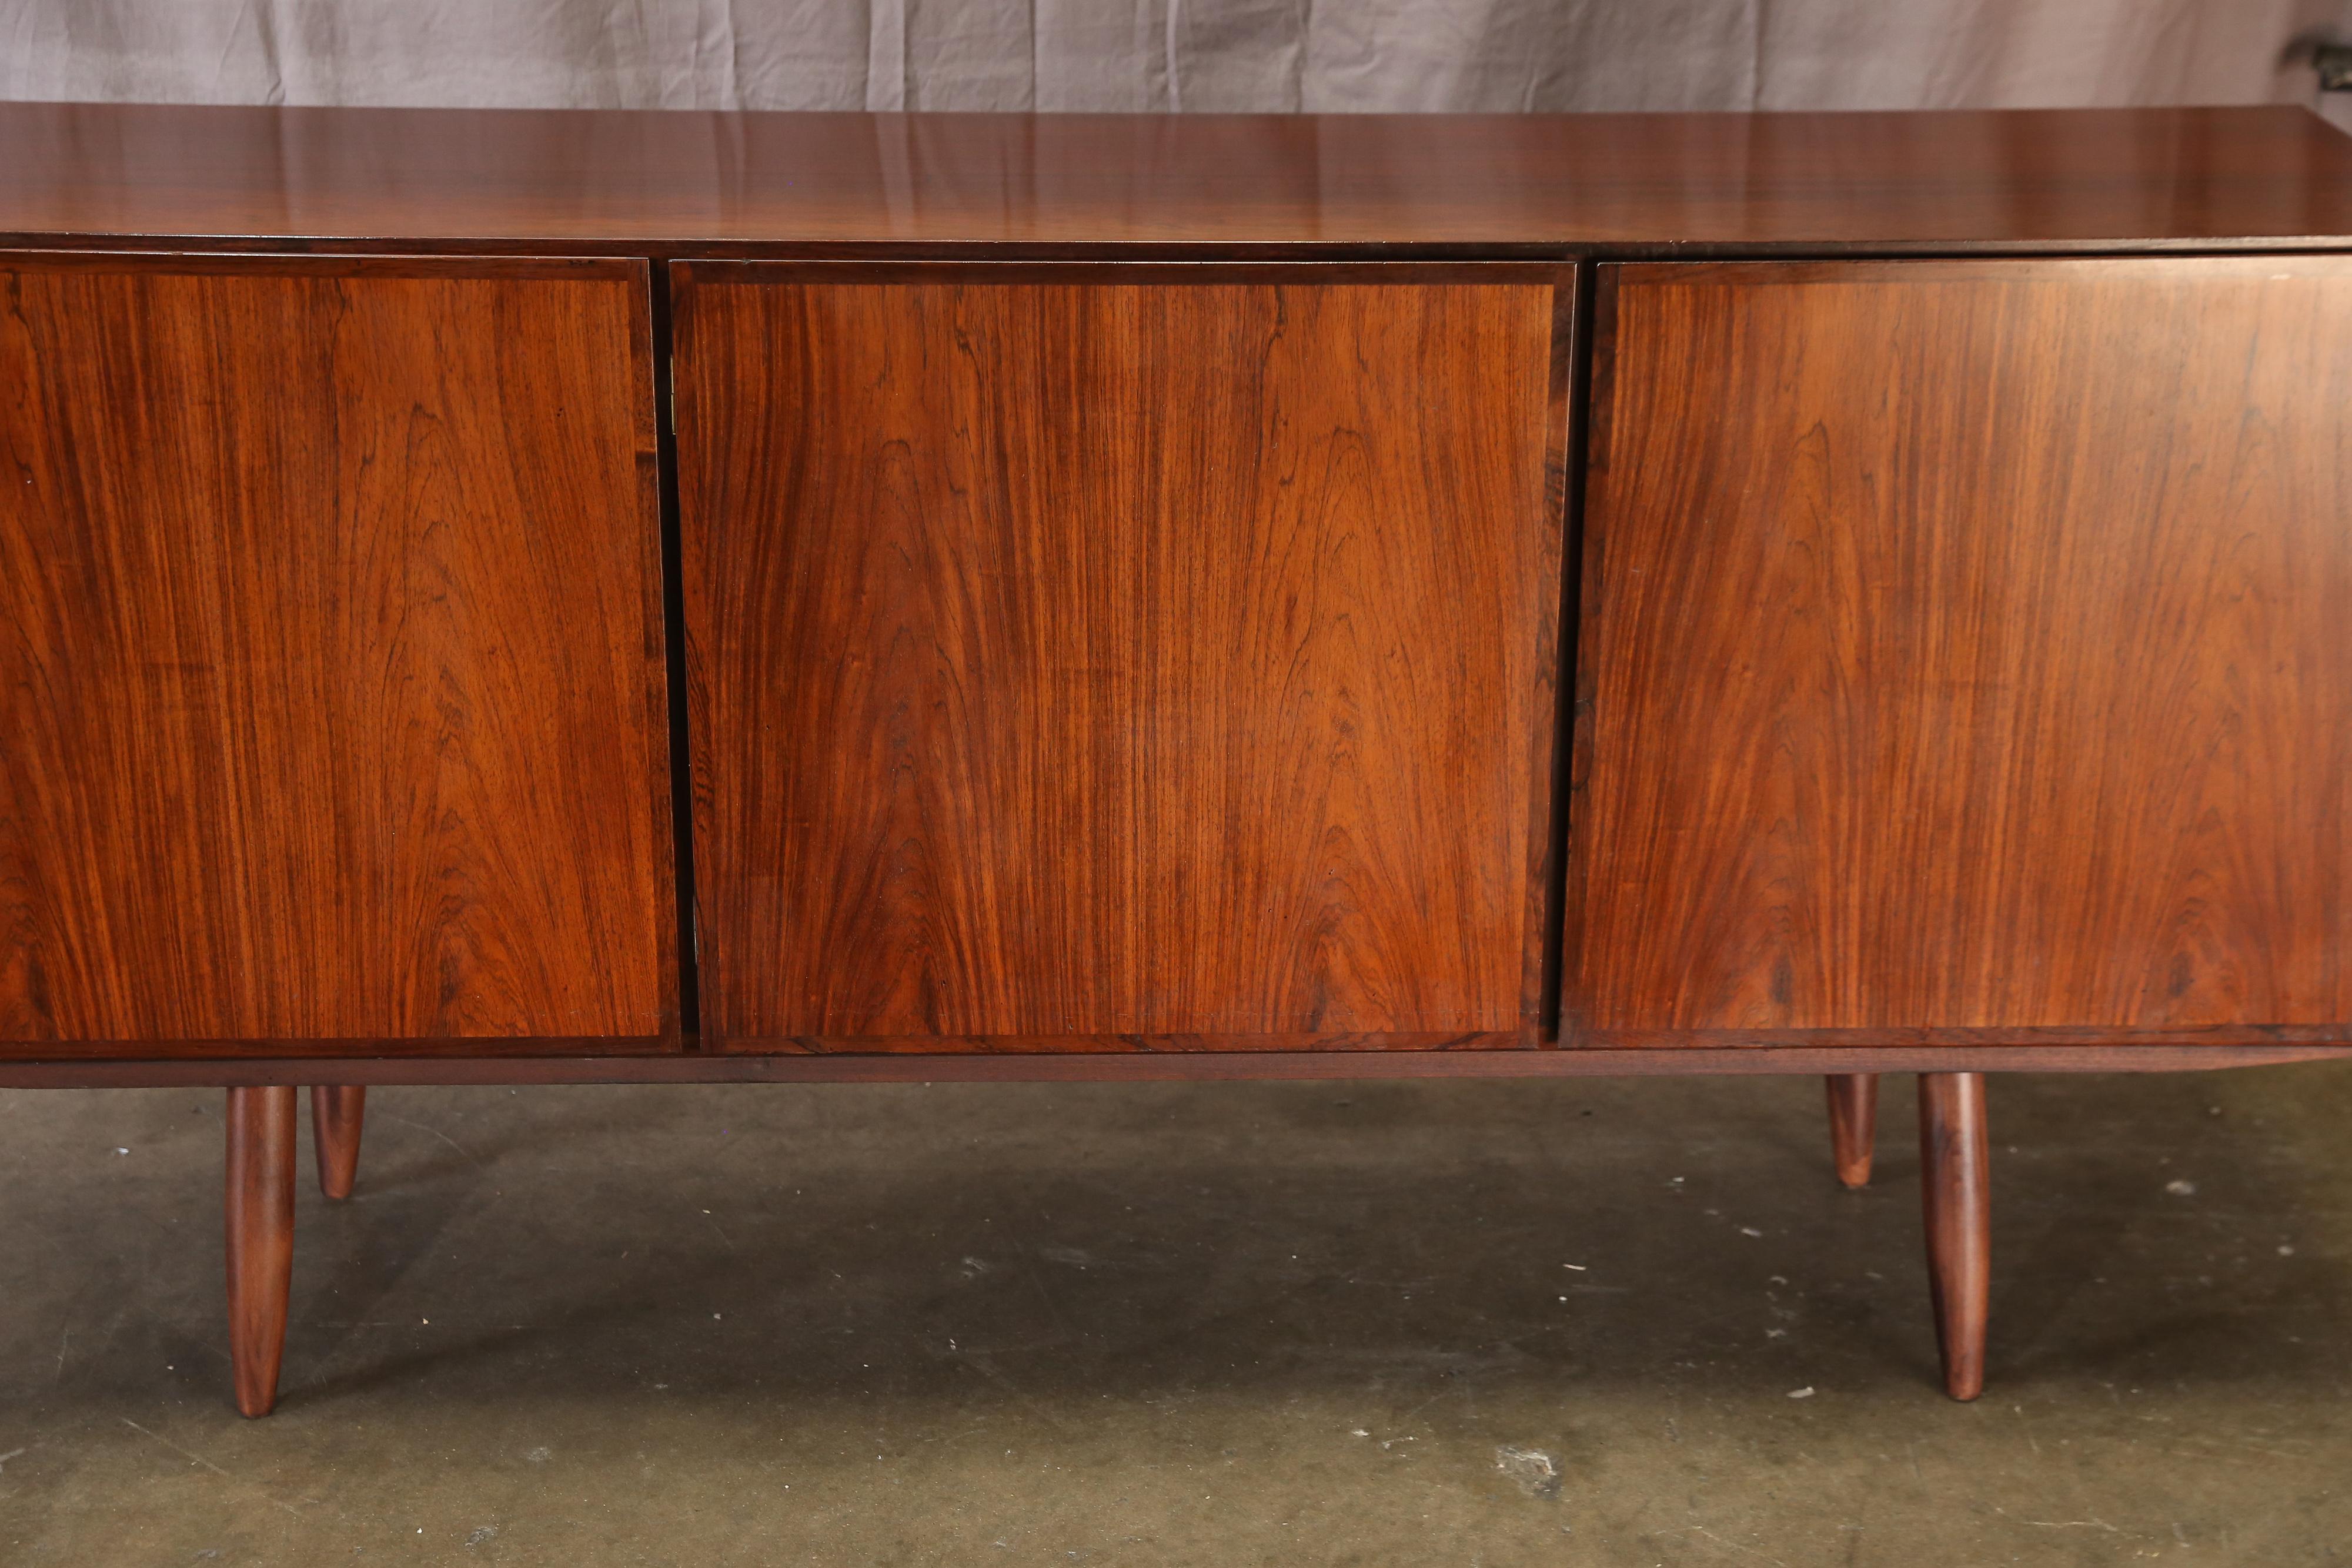 A finely-grained rosewood Model 30 credenza by Danish midcentury designer Gunni Omann for Omann Jun. Upper drawer and adjustable shelf in the left compartment. Double adjustable shelves in the centre and right compartments. Excellent condition.